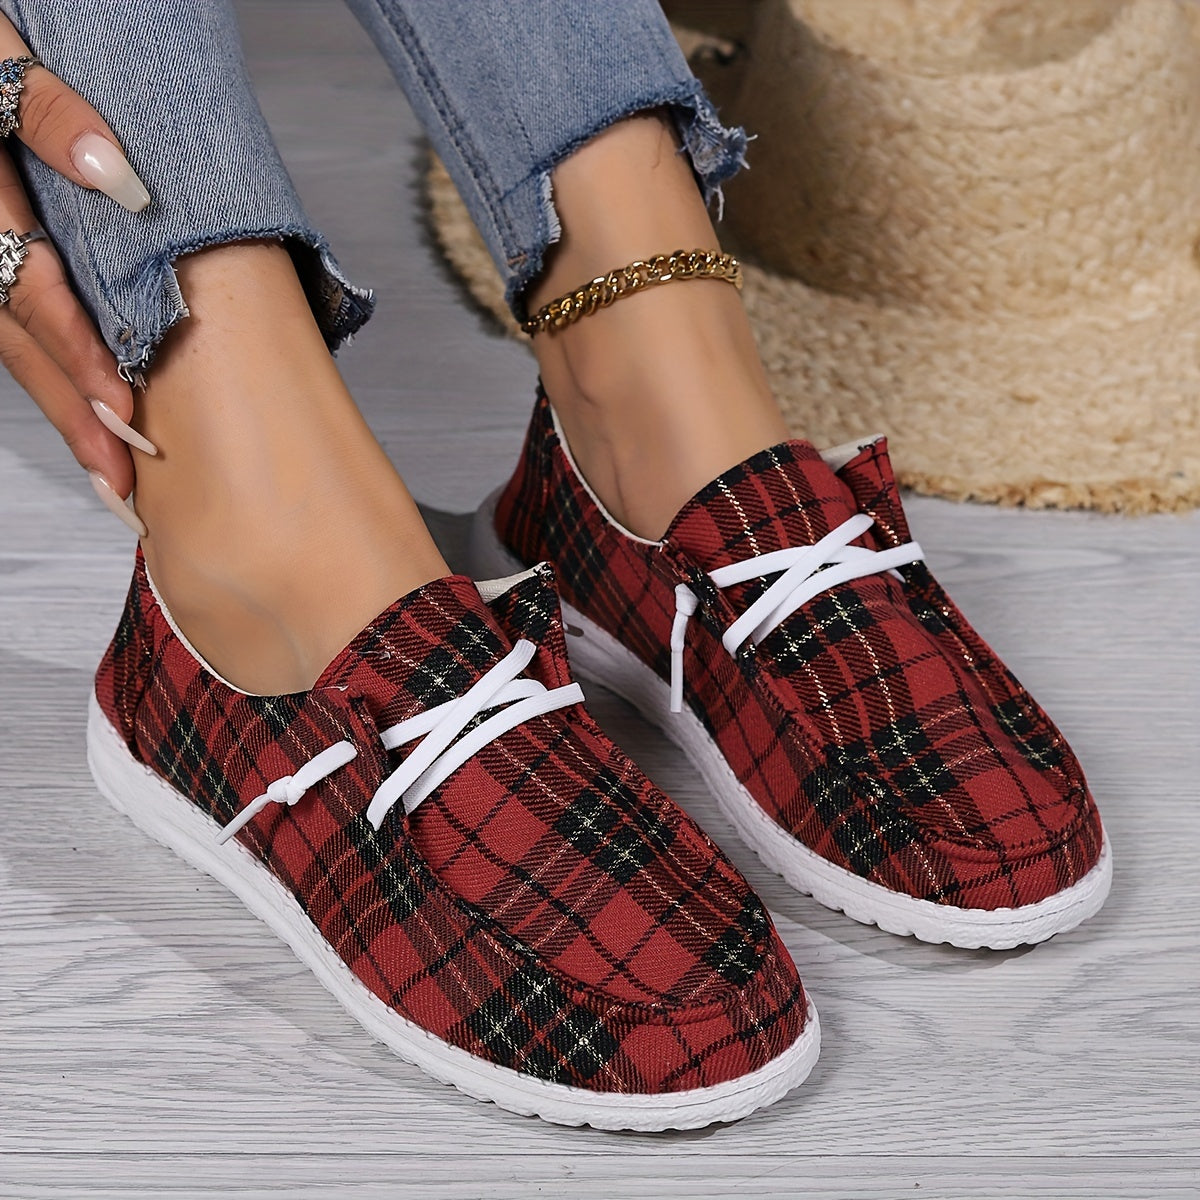 Santa Claus Print Canvas Shoes, Christmas Slip On Loafers